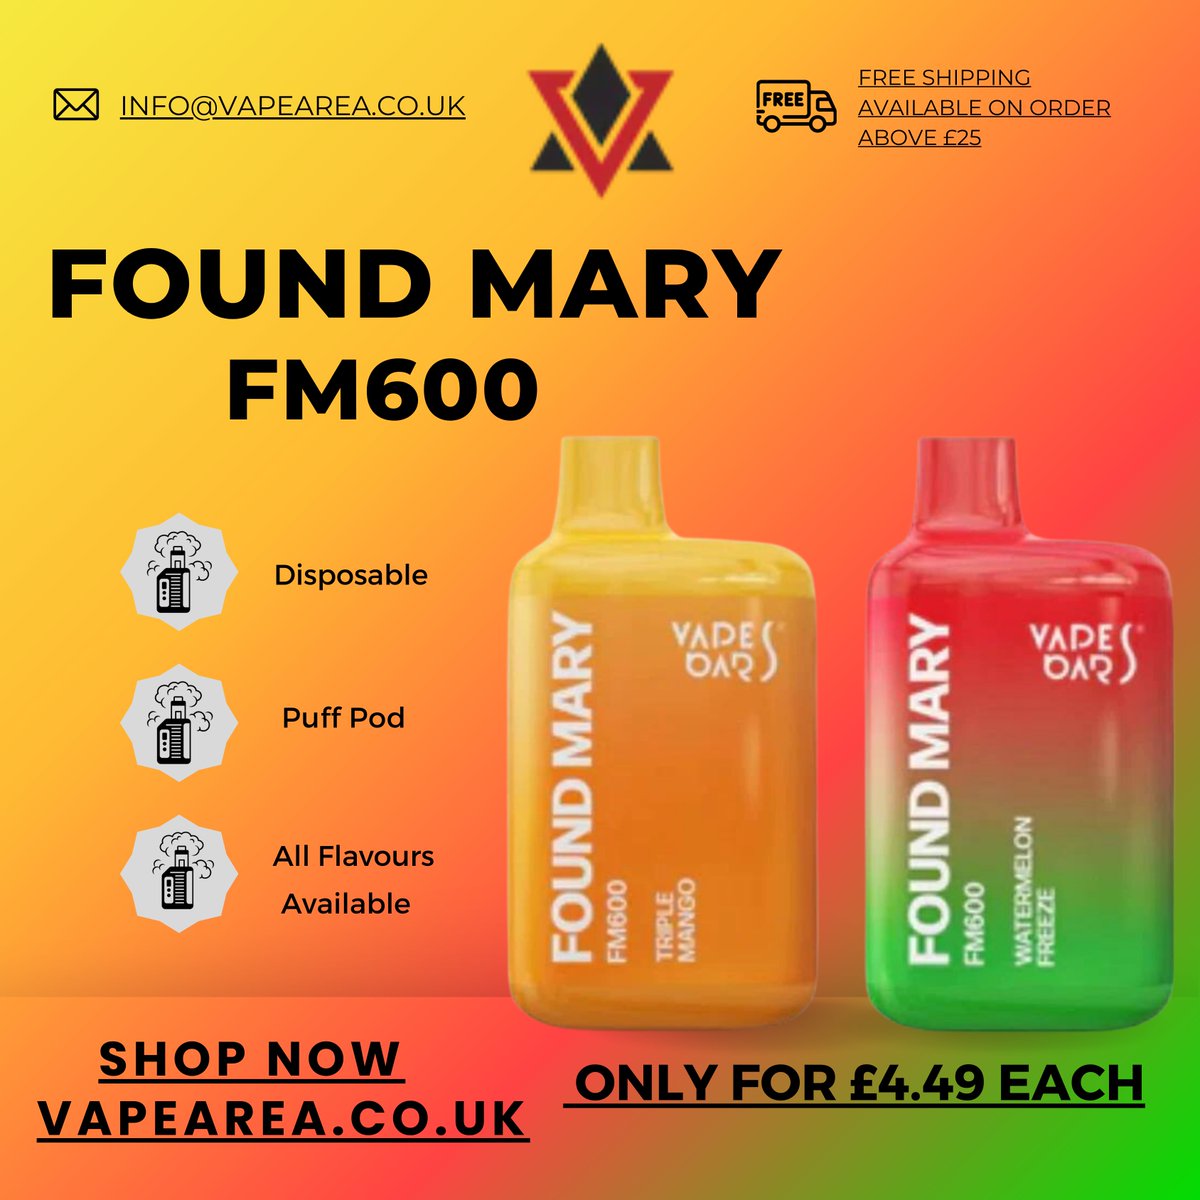 Found Mary FM600 Disposable Vape Pod Puff Device.
All Flavours Available on Vapearea.co.uk
#vapeshopuk #vapeshopnearme #vapeshoplife #vapeshop #vapestore #vapes #vapers #vapersofinstagram #vapersworldwide #vapersunite #vaperscommunity #vapershop #vapingtricks